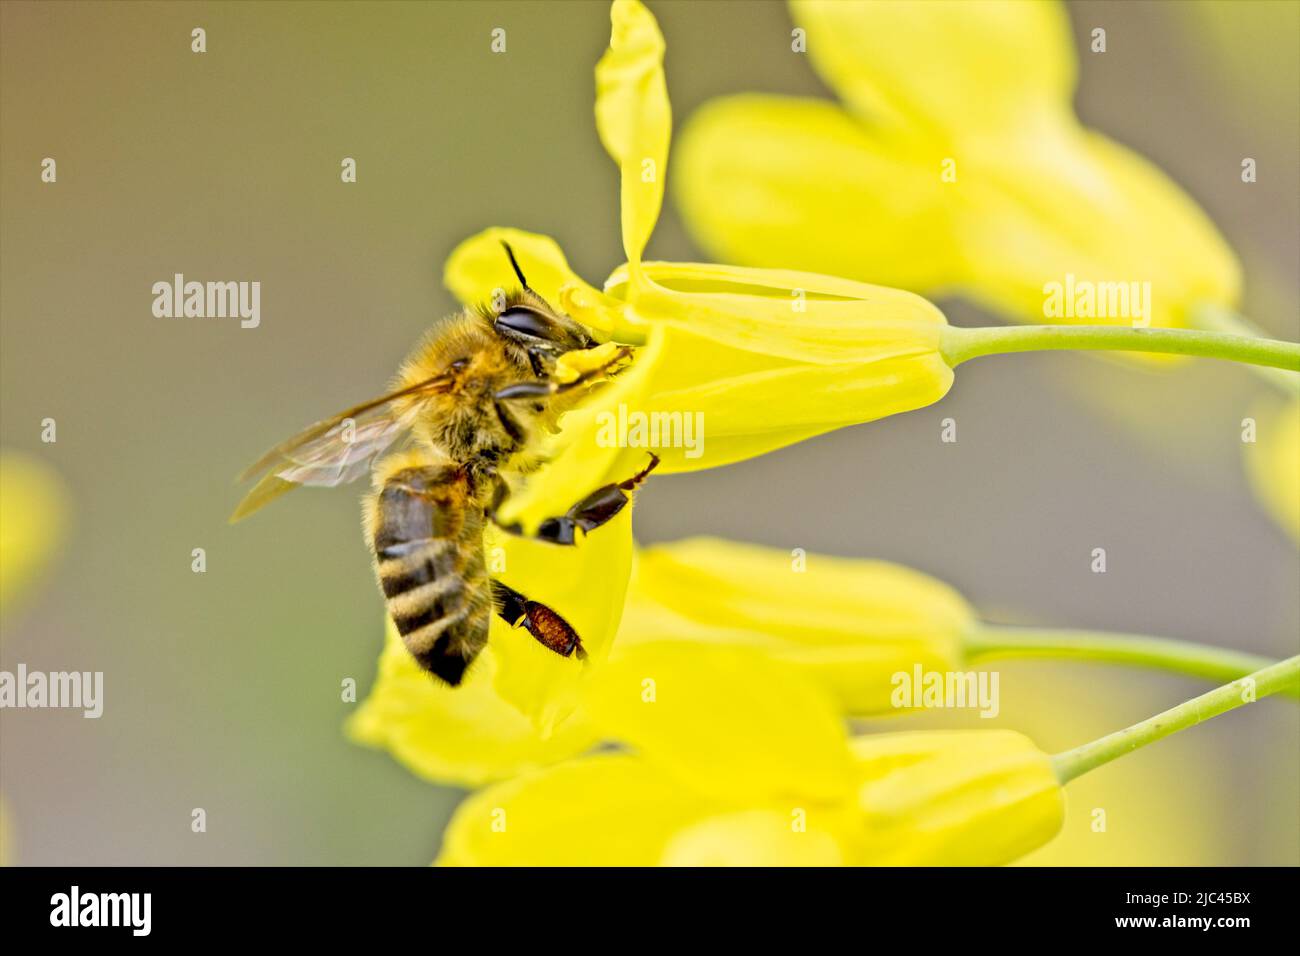 A close up of a honey bee gathering pollen inside a yellow flower in north Idaho. Stock Photo